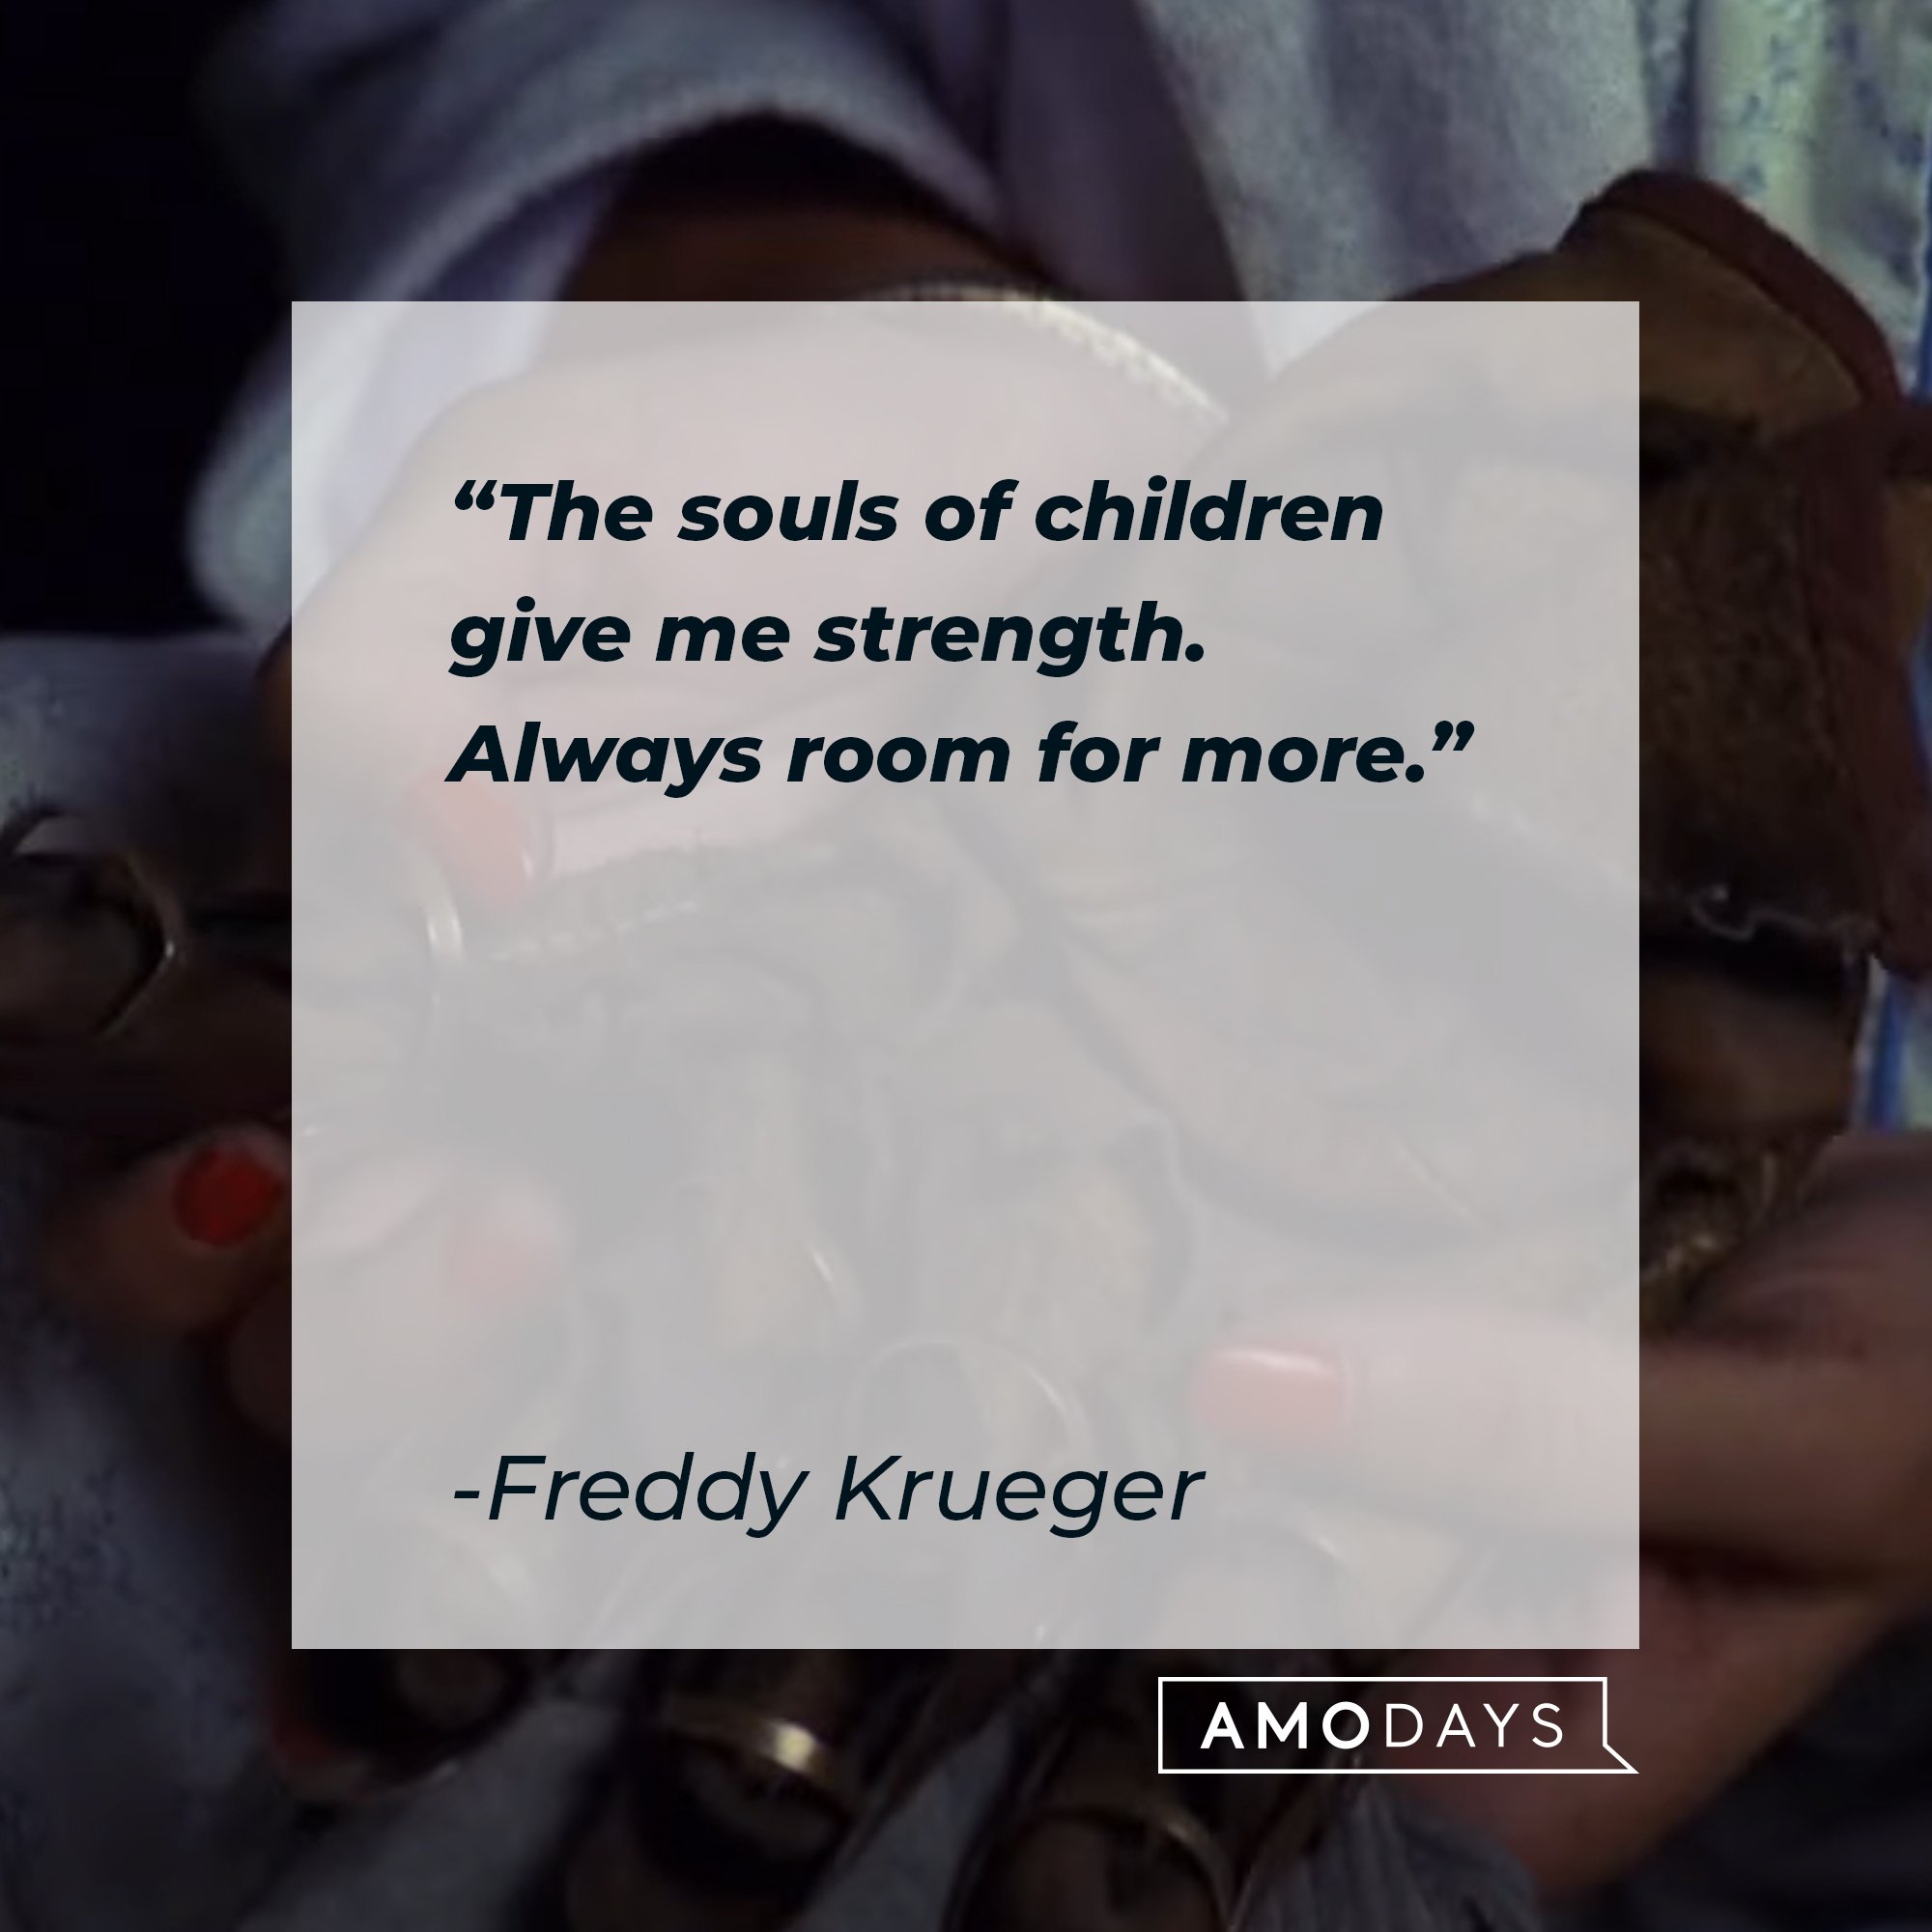 Freddy Krueger’s quote: "The souls of children give me strength. Always room for more." | Image: AmoDays